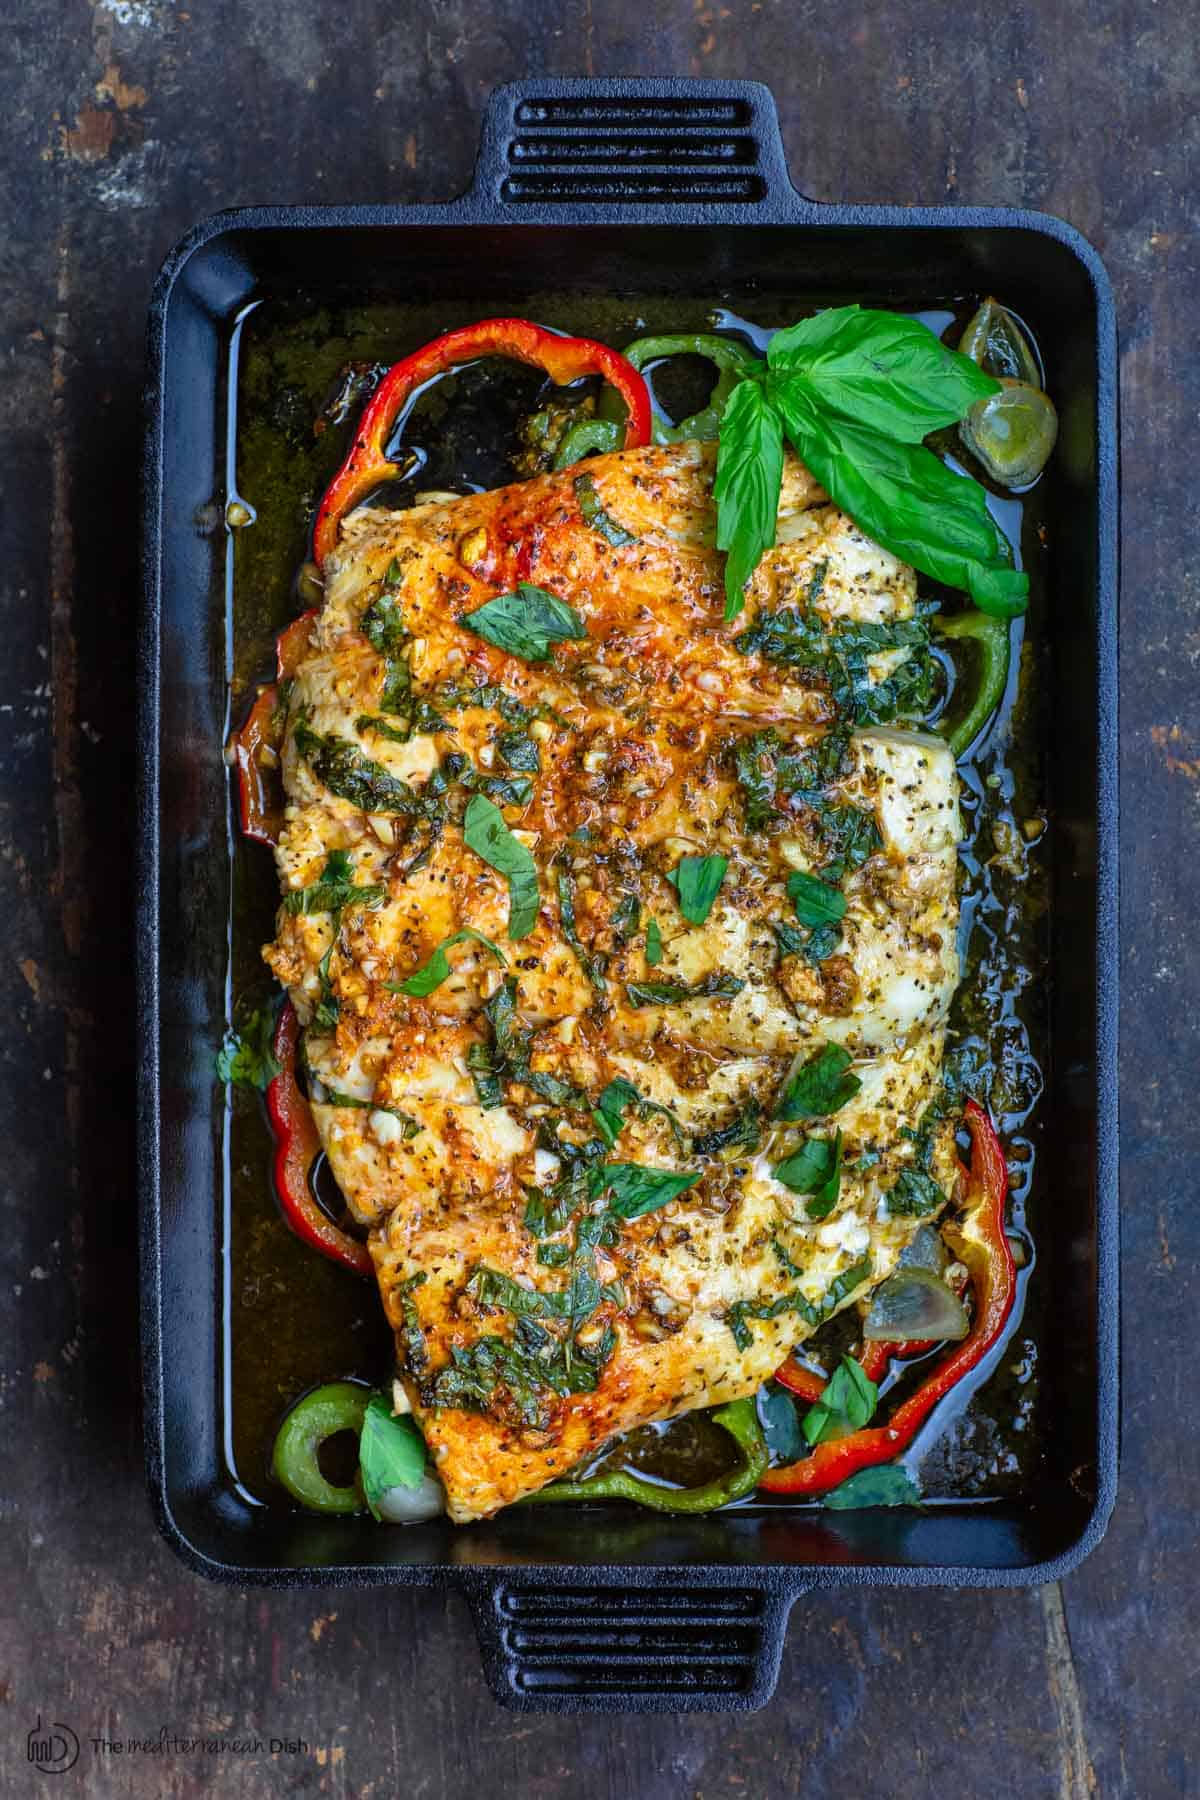 Easy Baked Fish with Garlic and Basil - The Mediterranean Dish